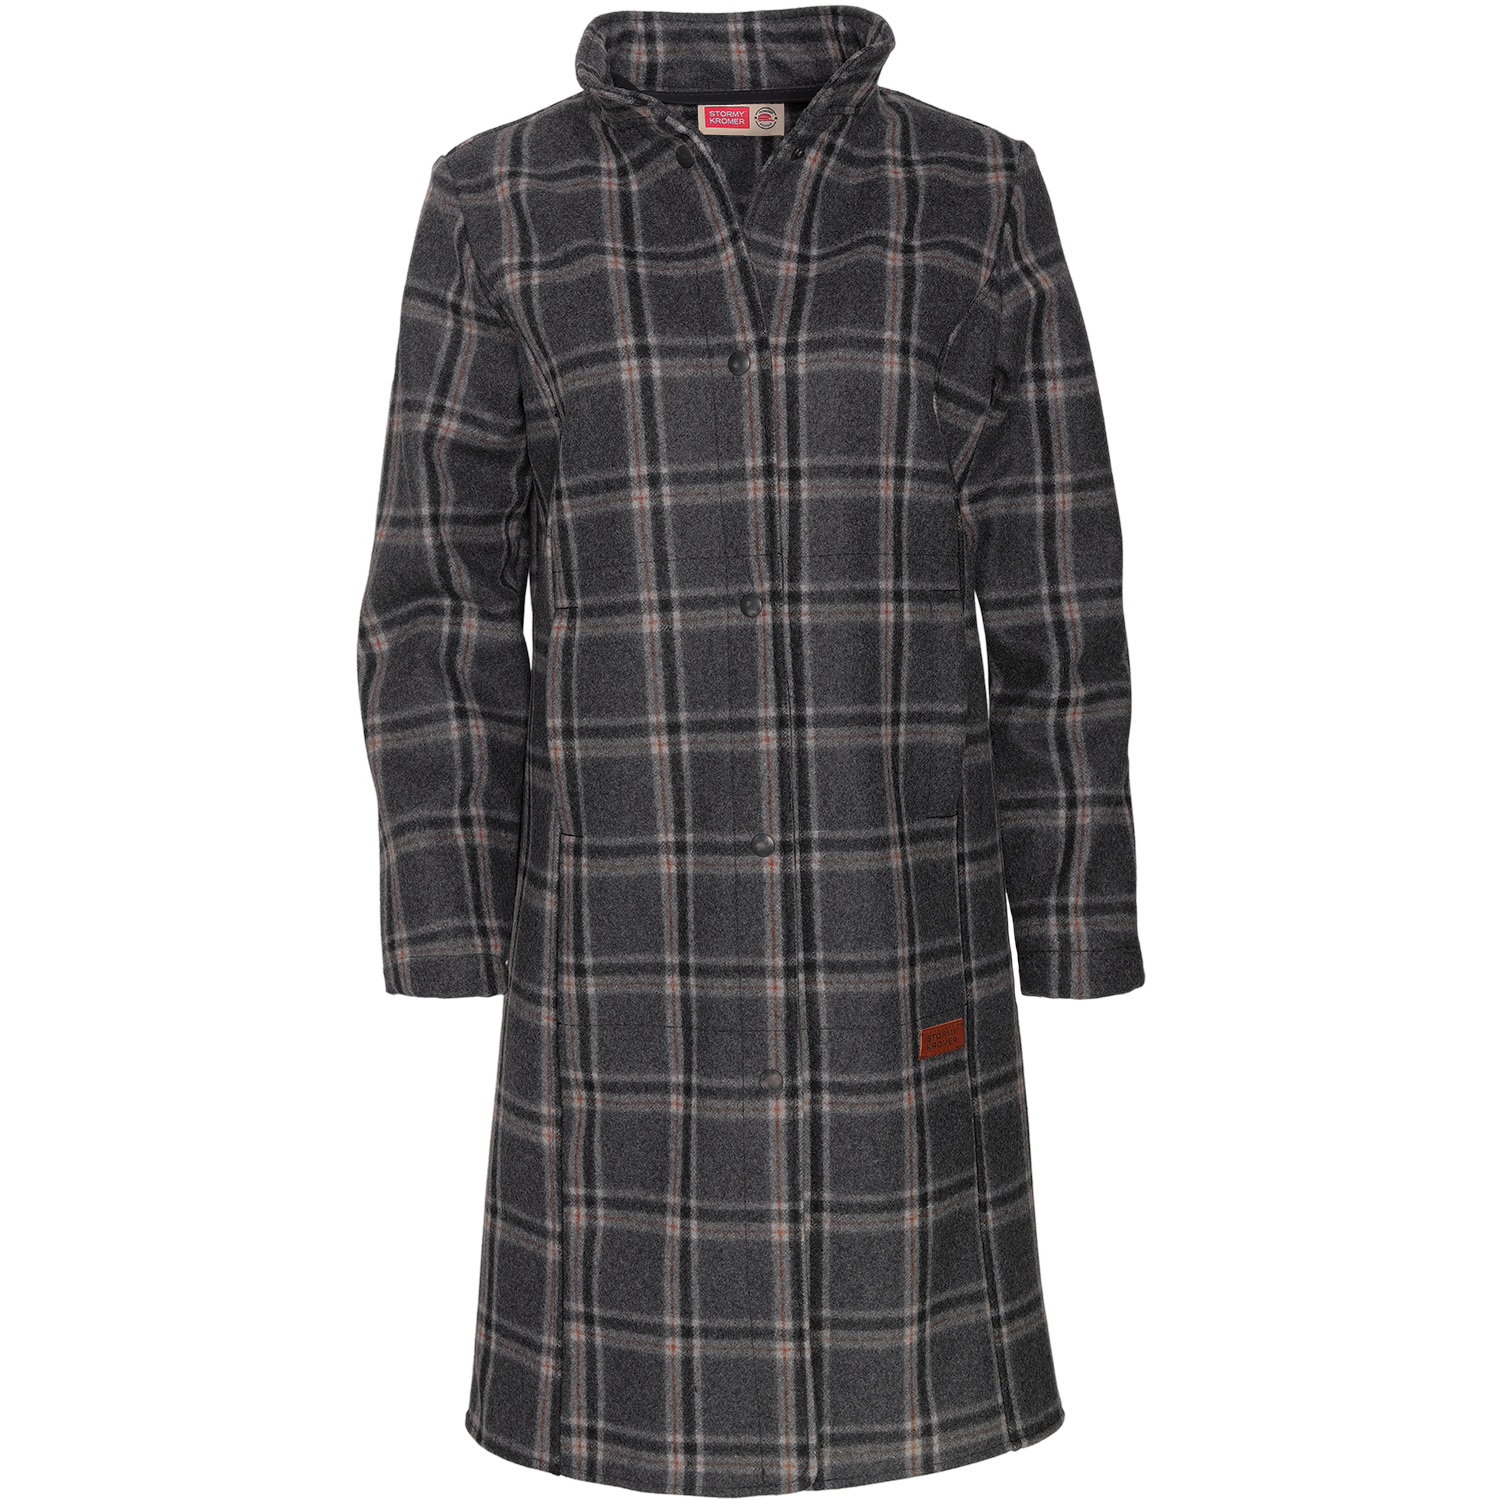 Picture of Stormy Kromer 56380 Cinder Coat